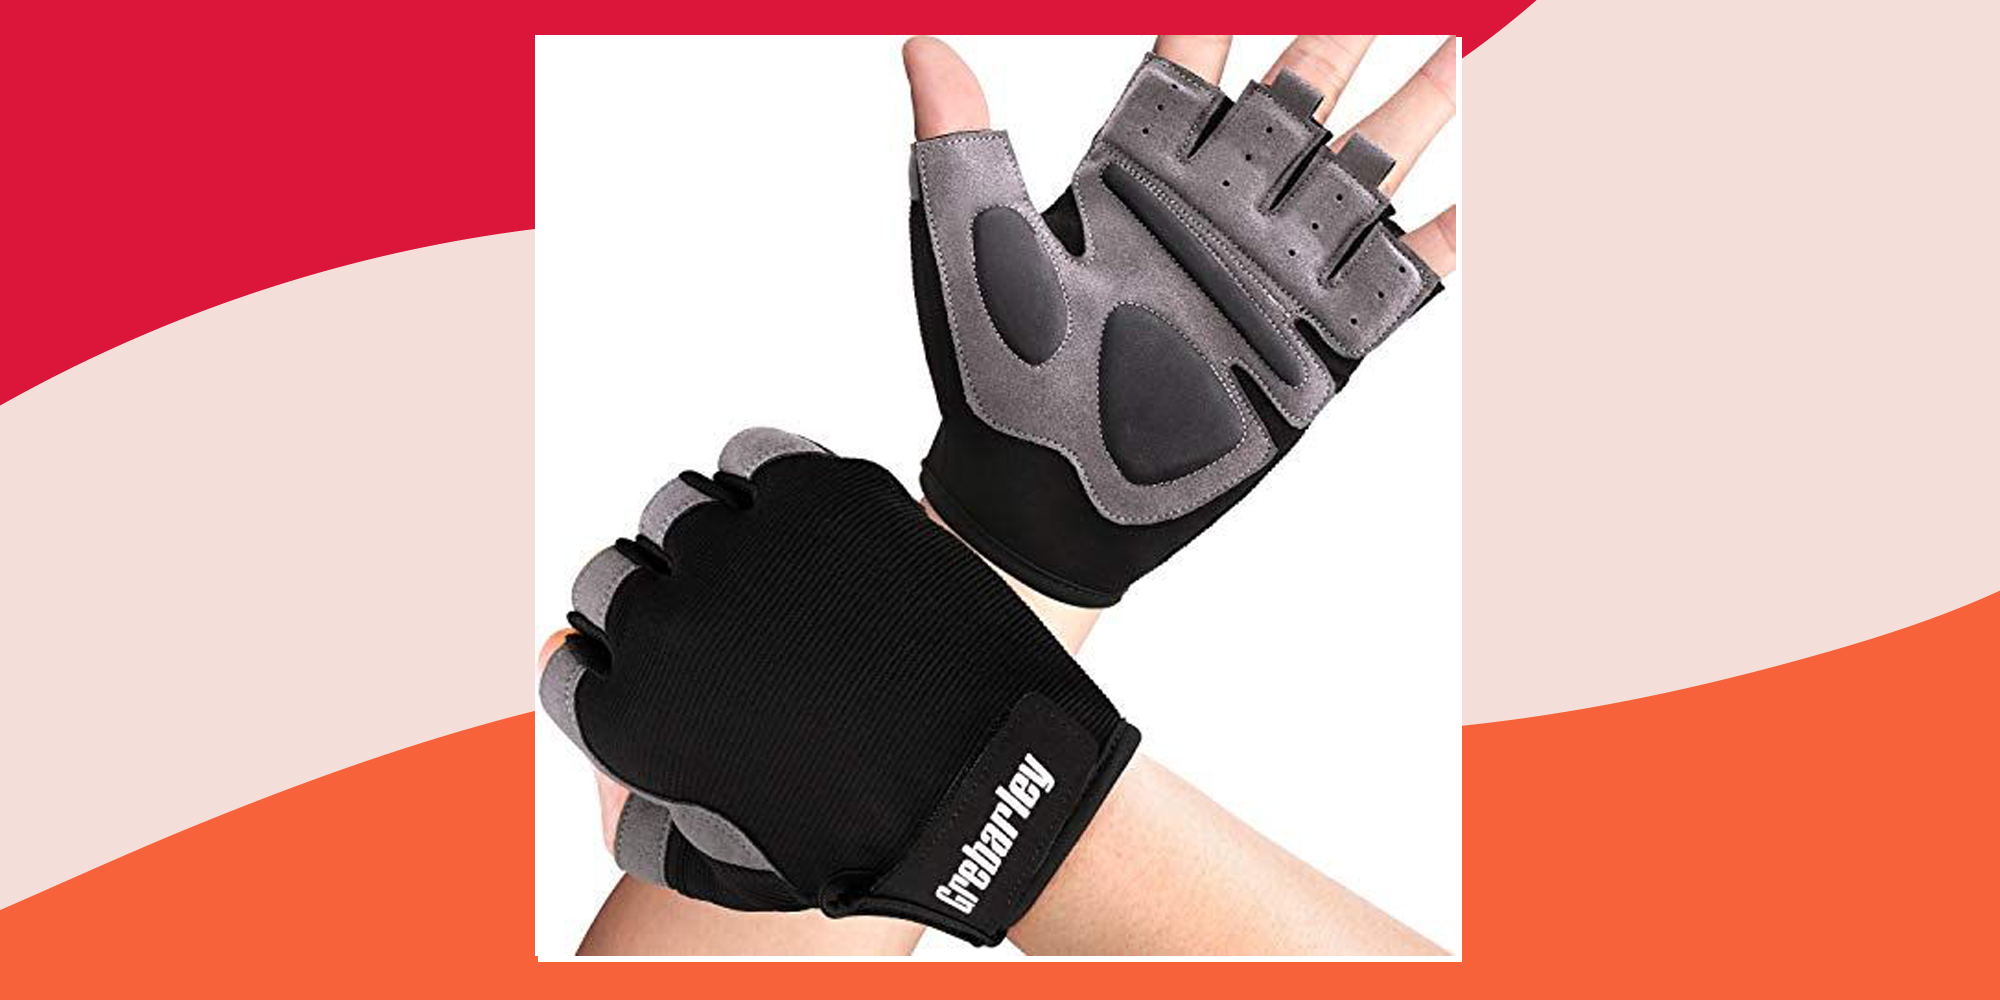 LEATHER FINGER LESS WEIGHT LIFTING WORK OUT EXERCISE FITNESS PADDED GLOVES 